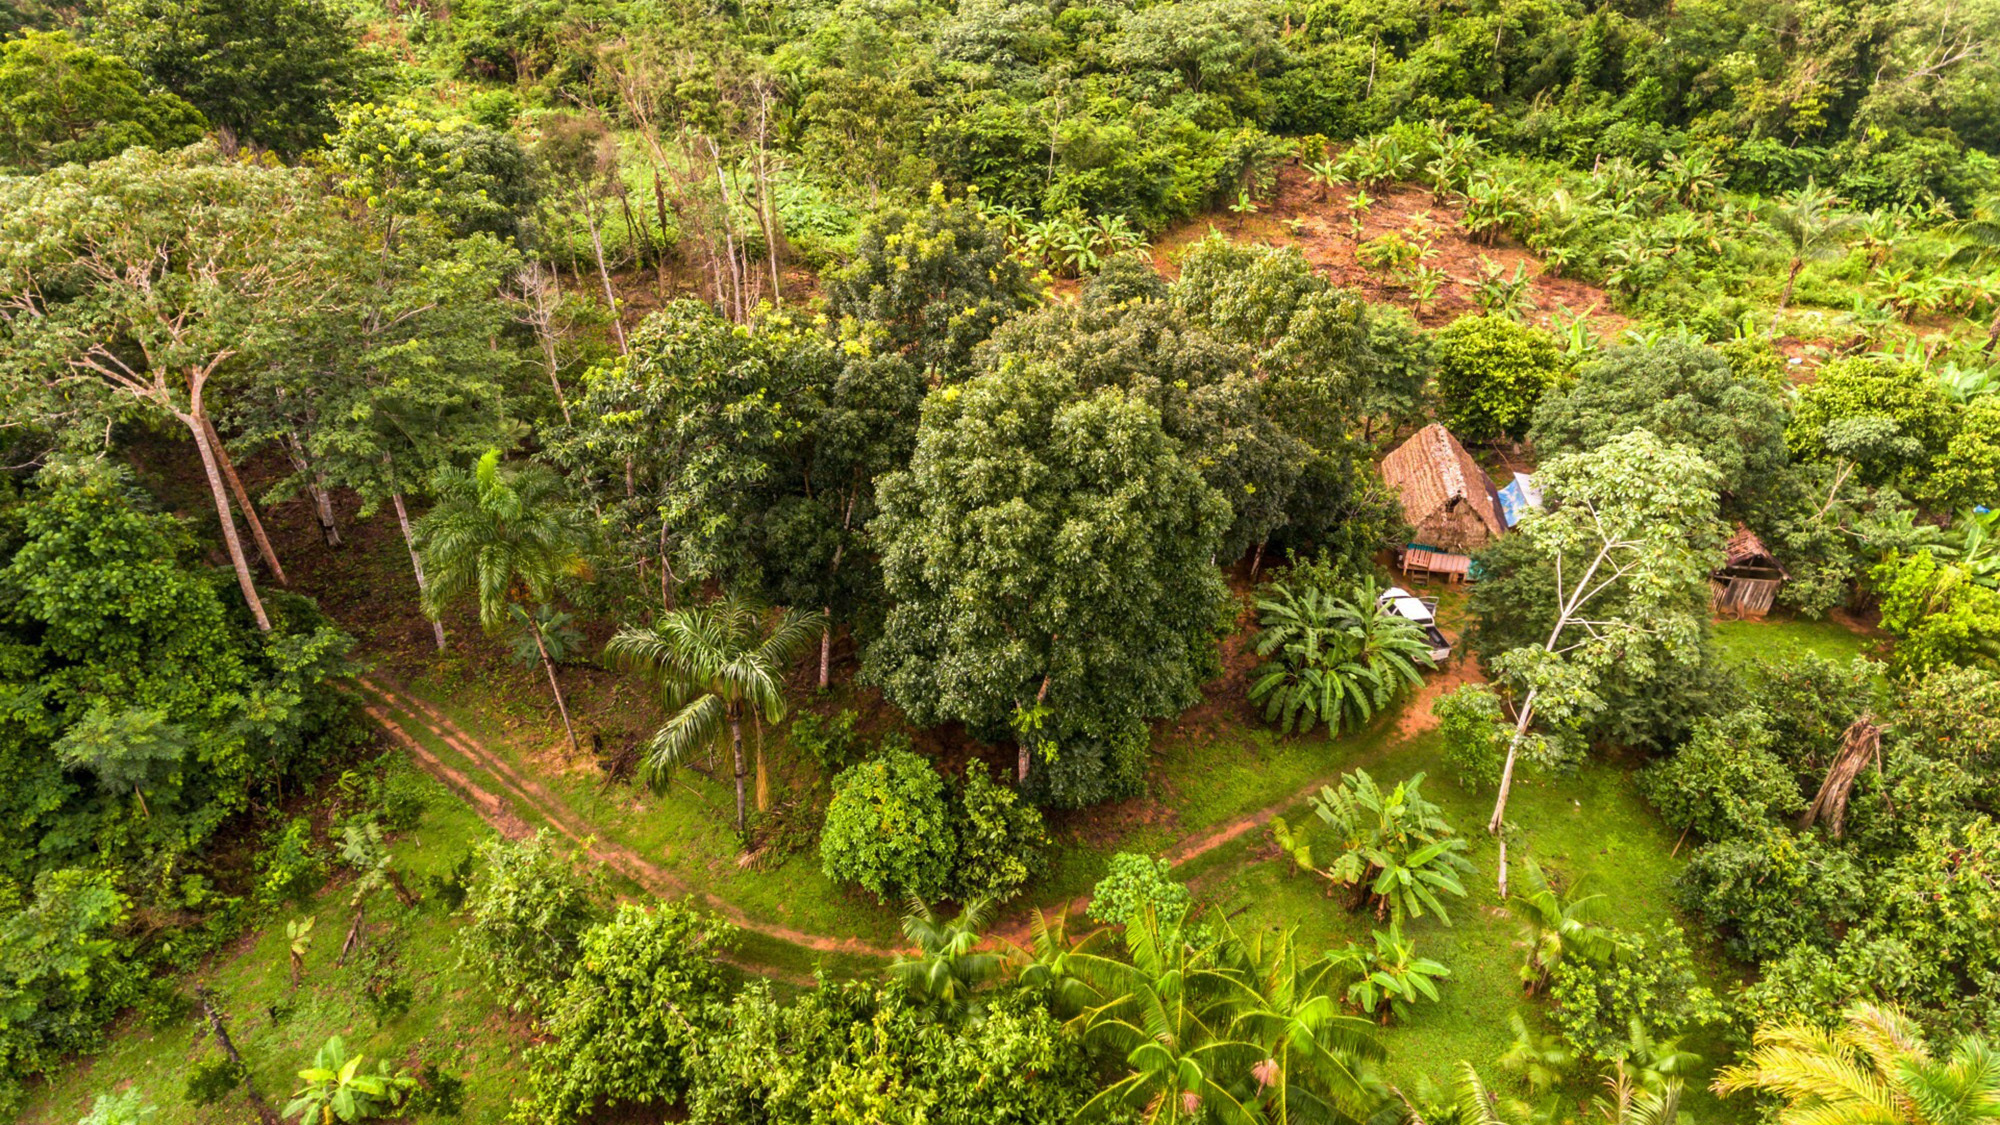 Amazon agroforestry land with a variety of tropical crops including bananas, brazil nuts, papaya, pineapple, yuca, and more.